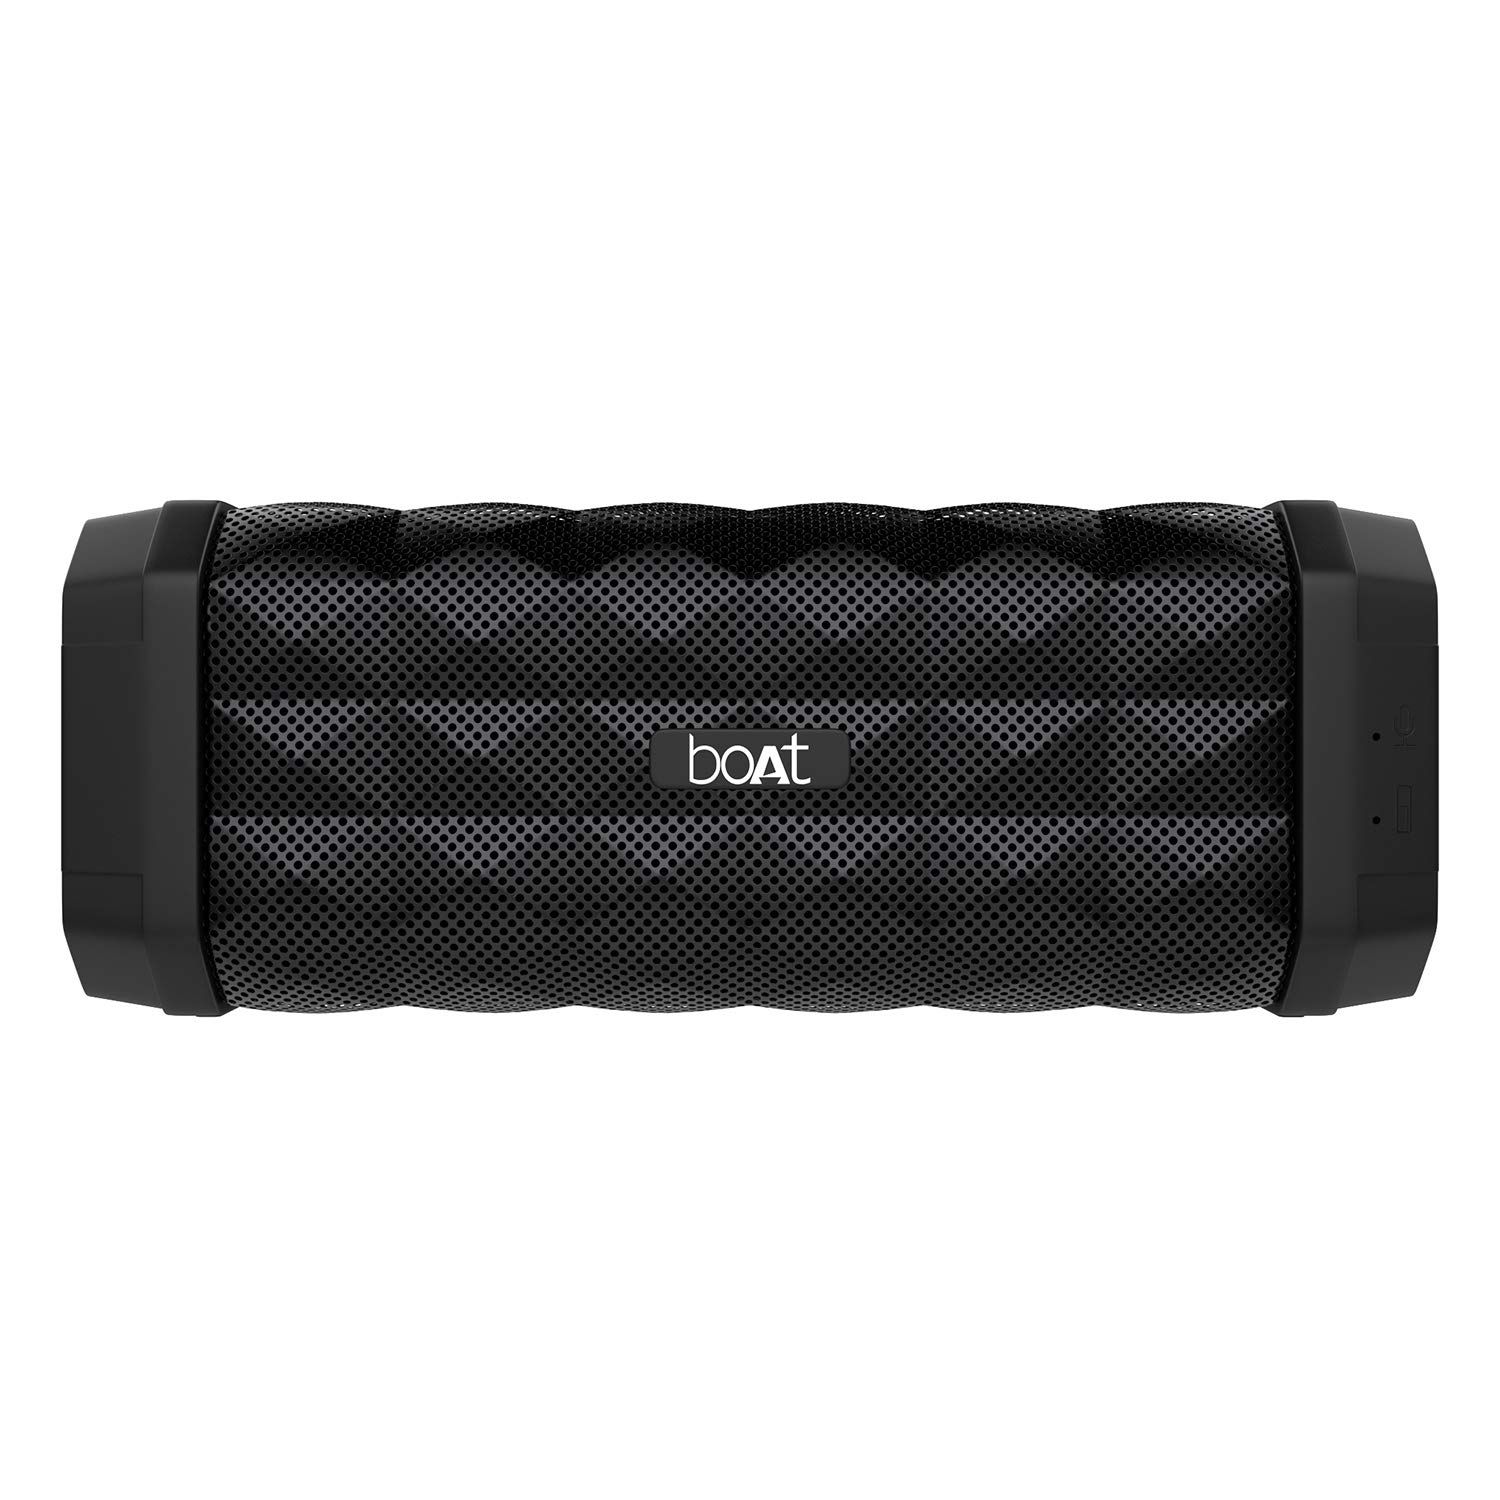 boAt Stone 650 10W Wireless Speaker with IPX5 Water Resistance, 7 Hours of Playtime and Bluetooth v4.2 (Black)